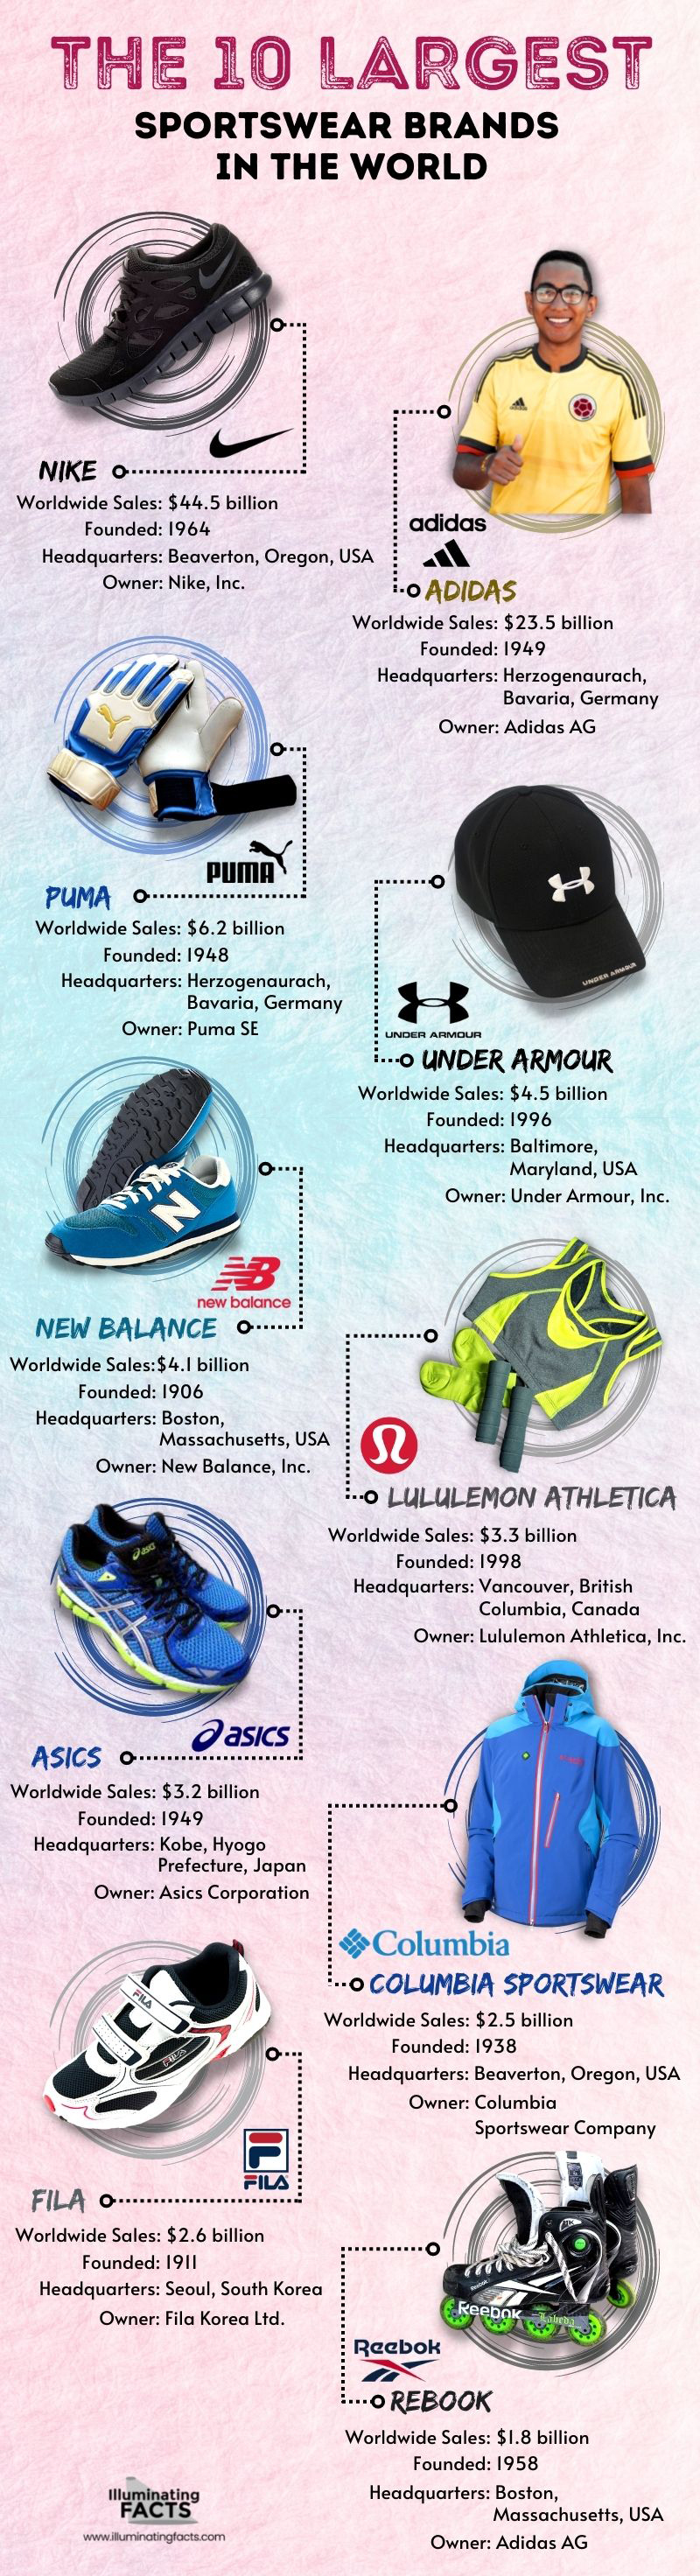 THE-10-LARGEST-SPORTSWEAR-BRANDS-IN-THE-WORLD